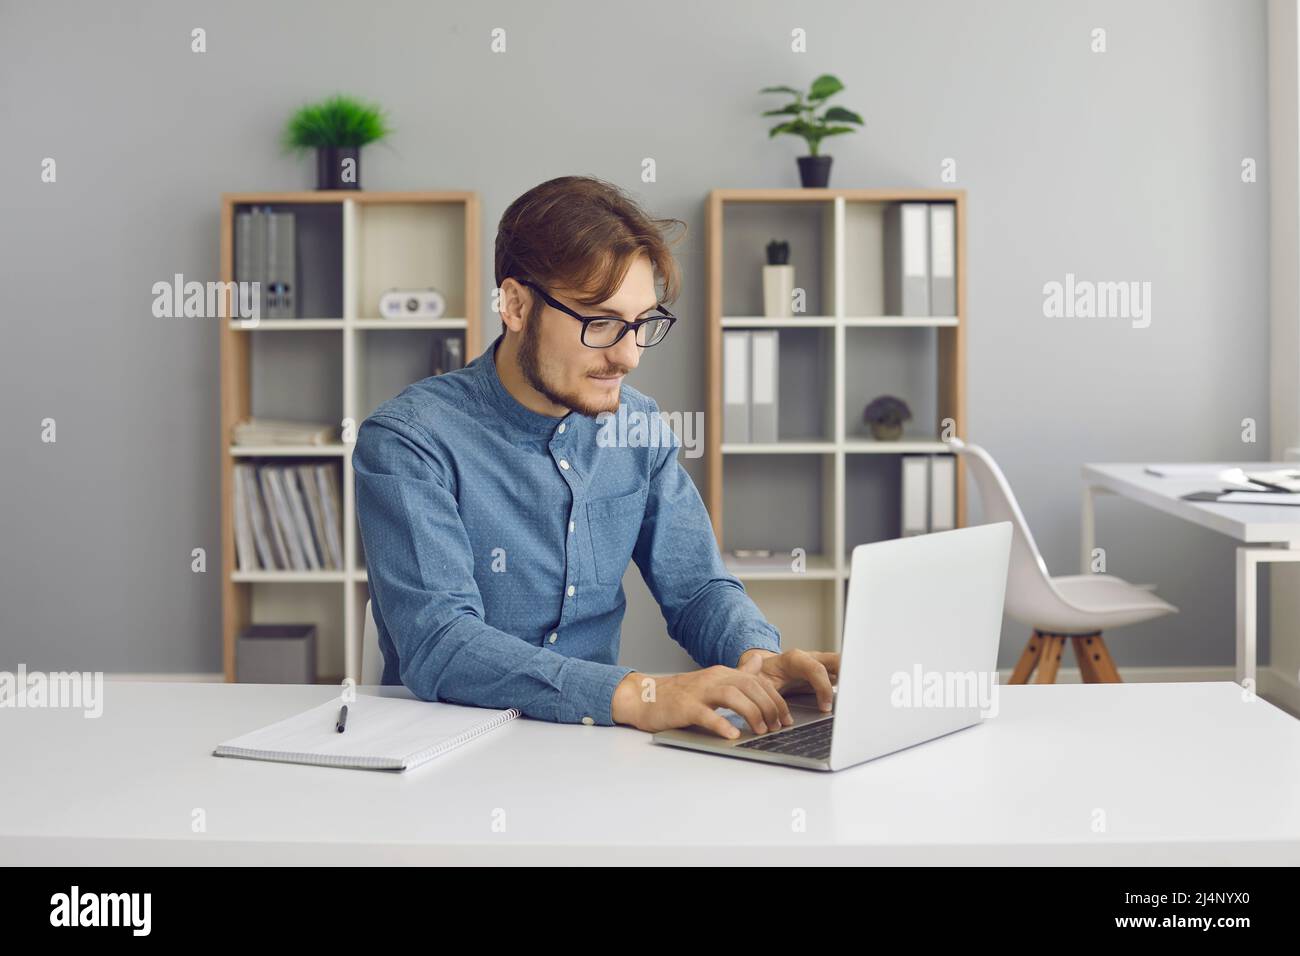 Happy student or office worker sitting at desk and working on his laptop computer Stock Photo